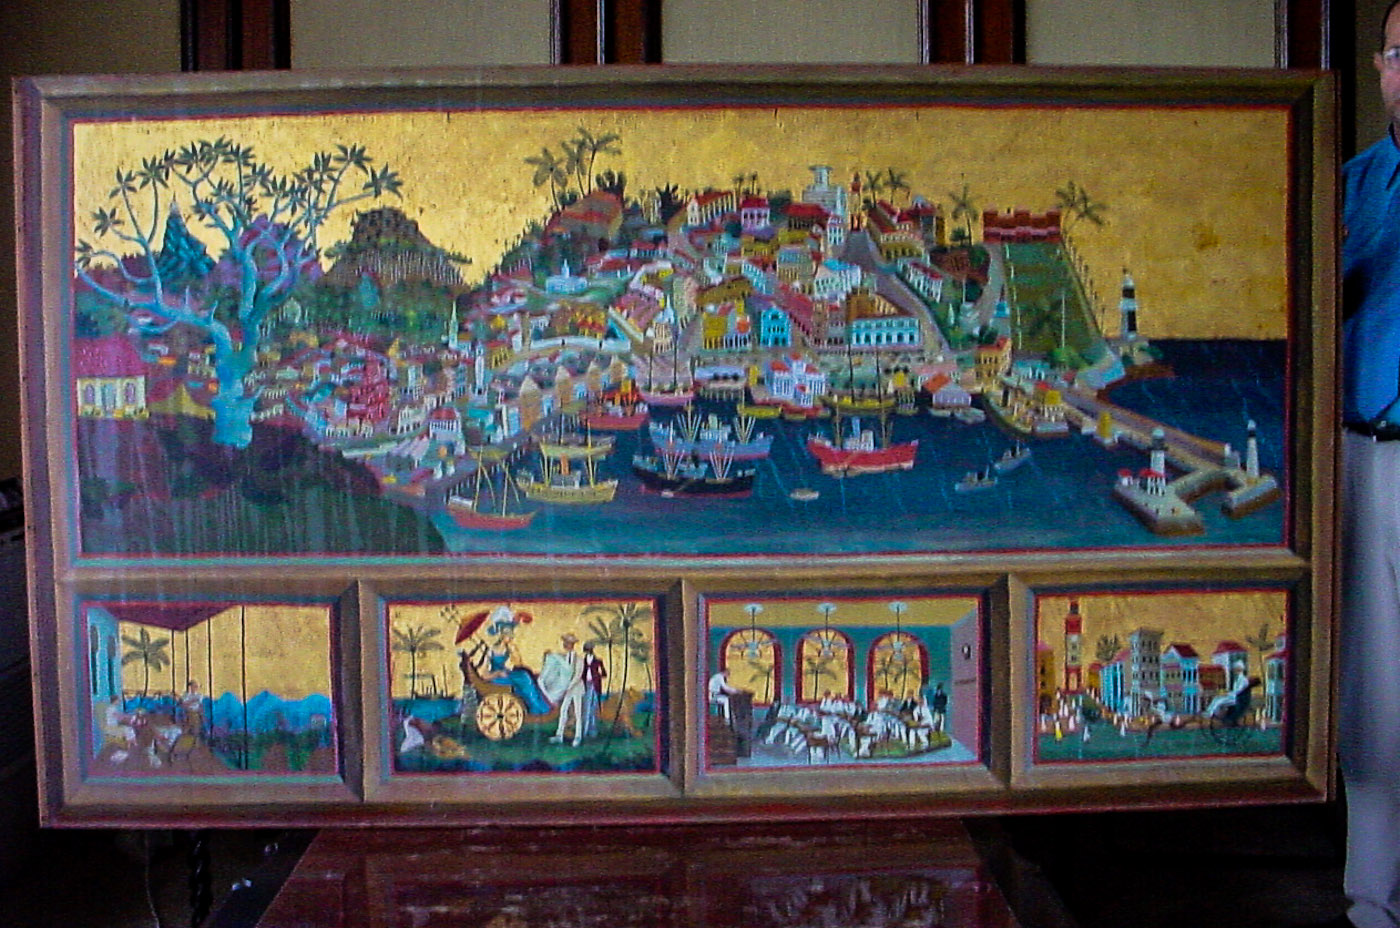 The mural after being removed, held by Michael Anthonisz